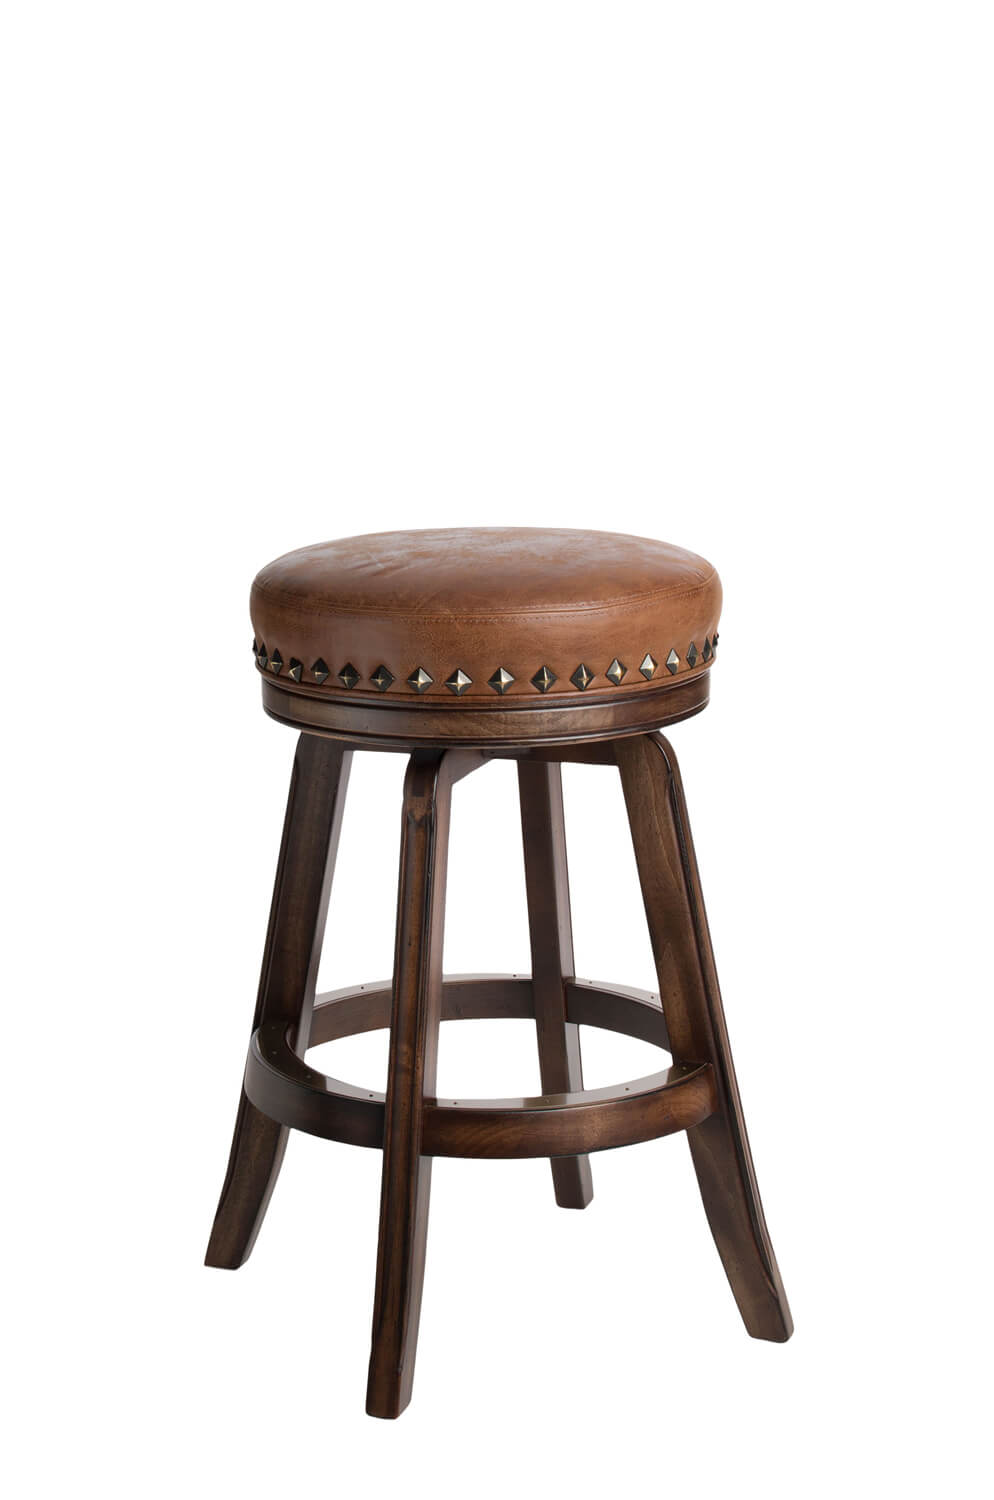 Leather Bar Stool With Back 34" Seat Height Espresso Wood Frame Nailheads 